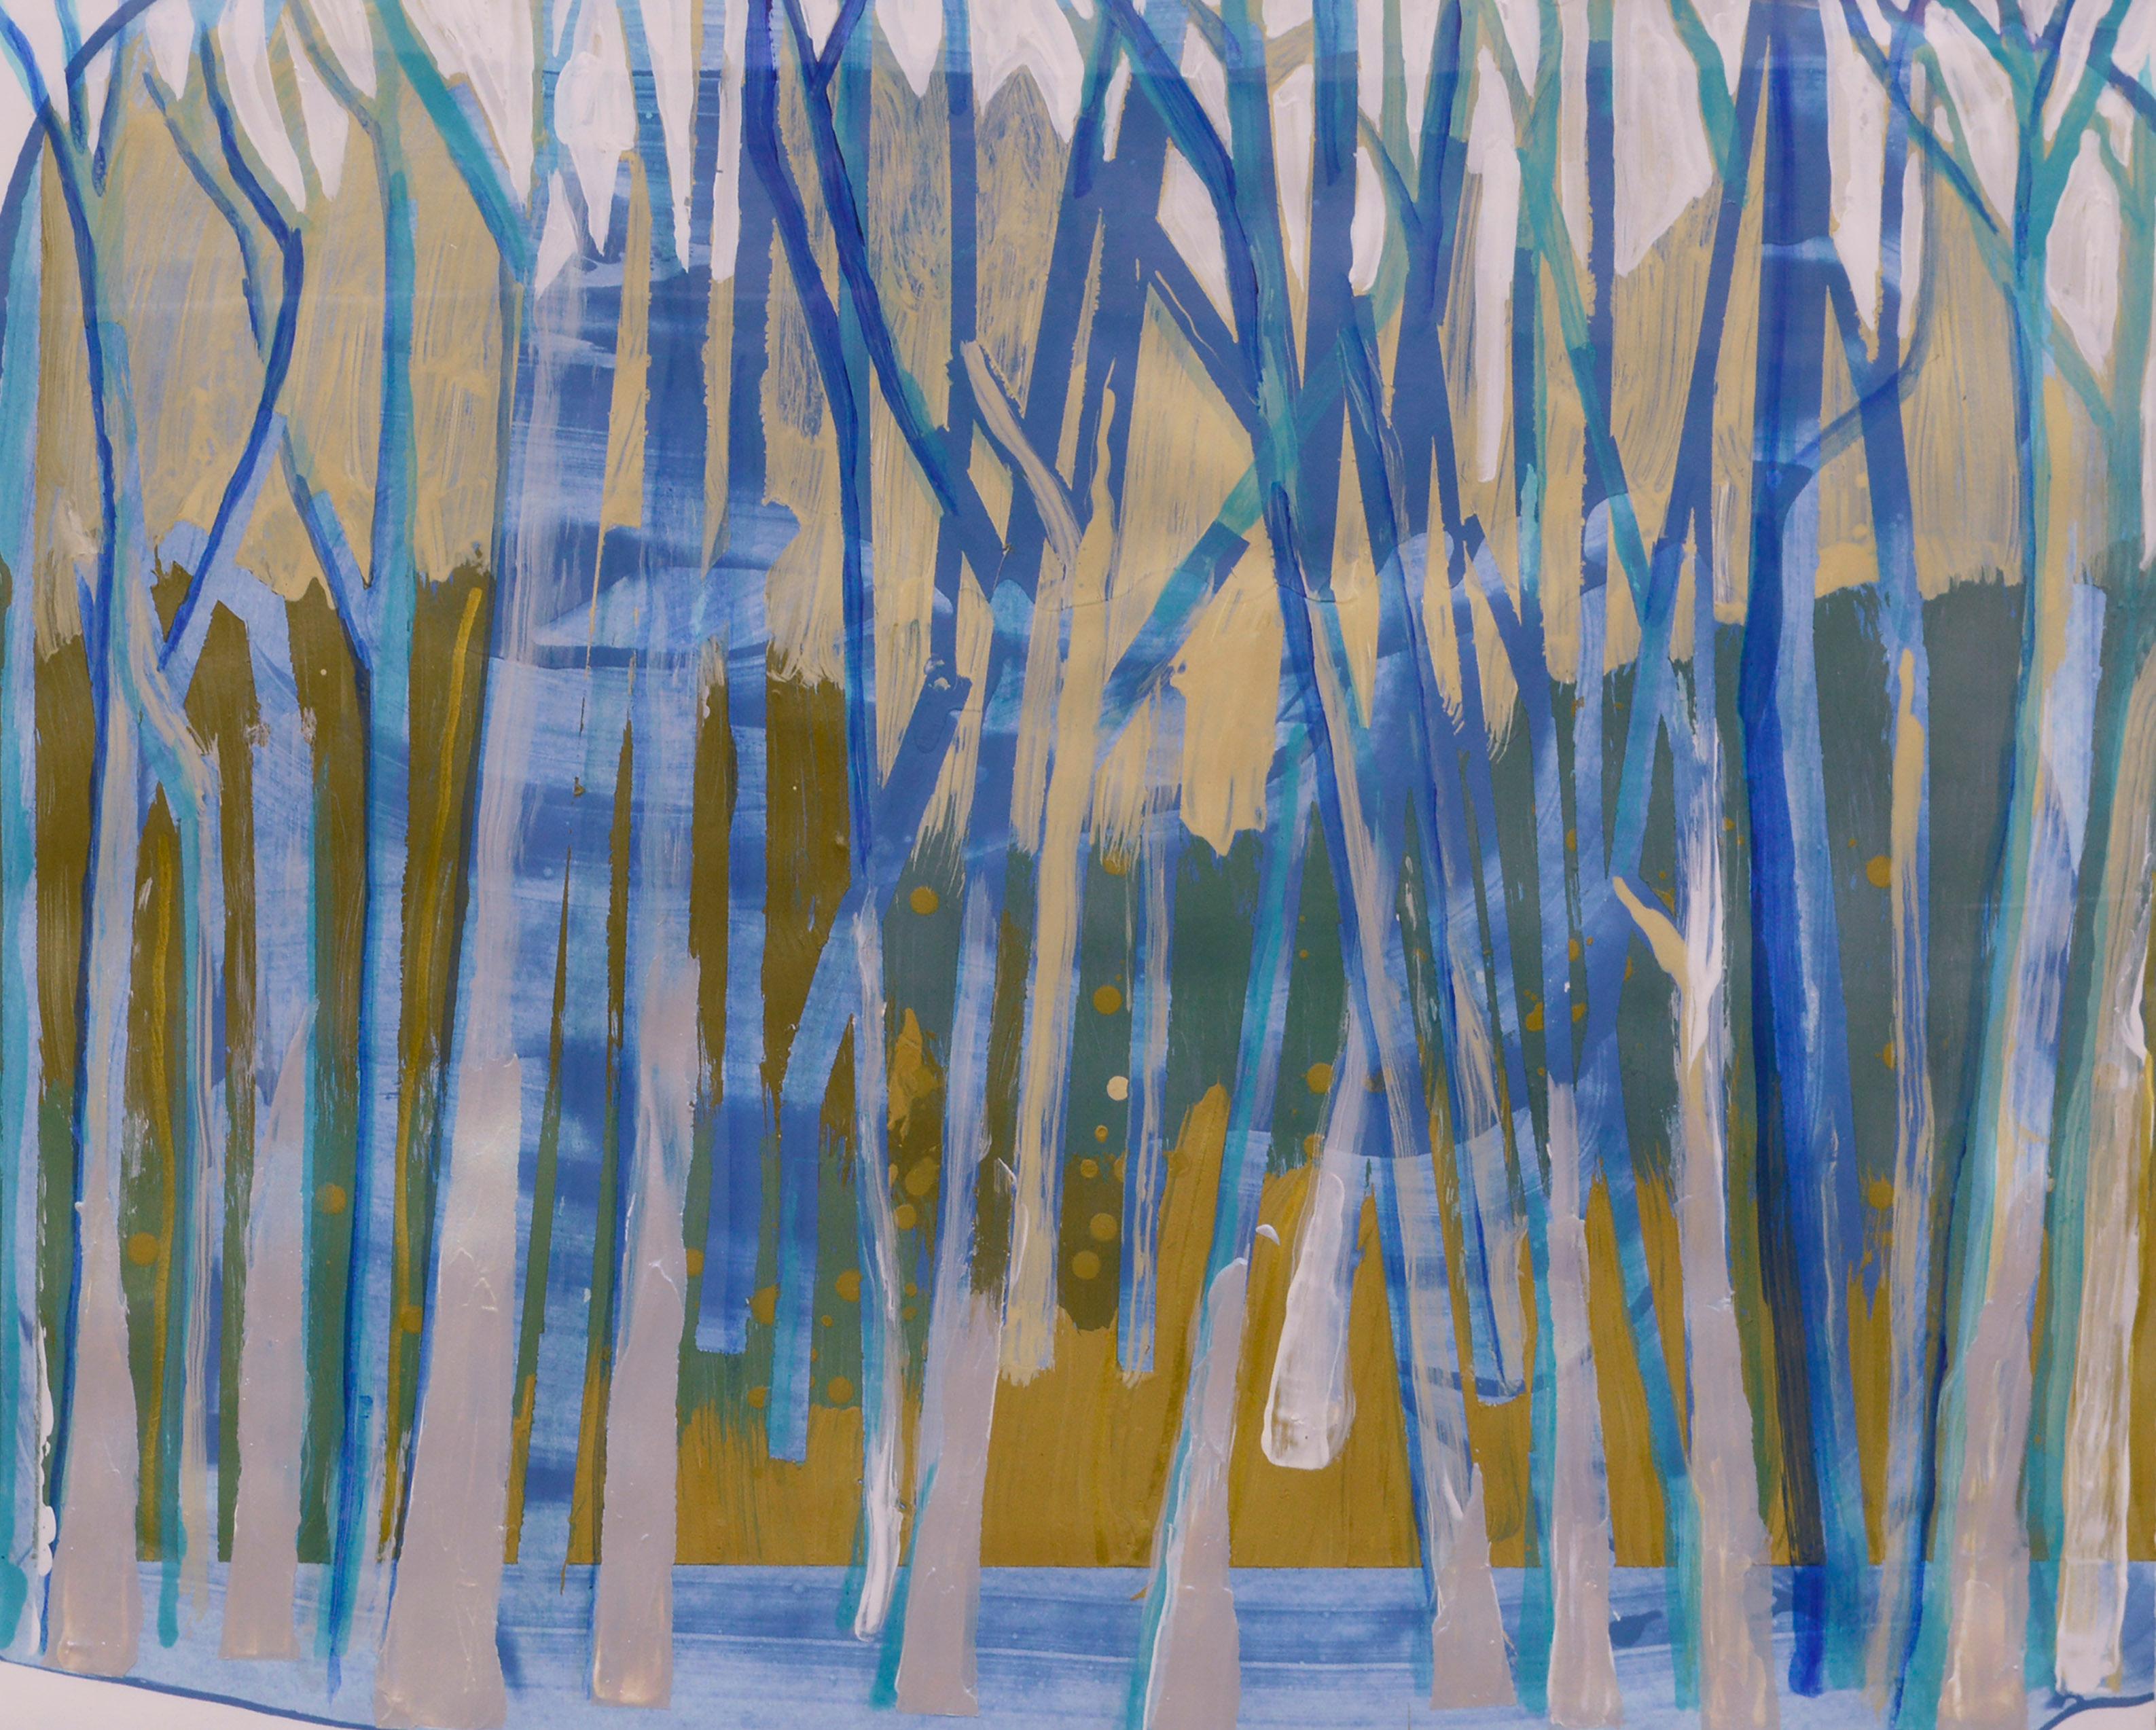 Blue Trees, Large-Scale Contemporary Abstract Forest Landscape  1